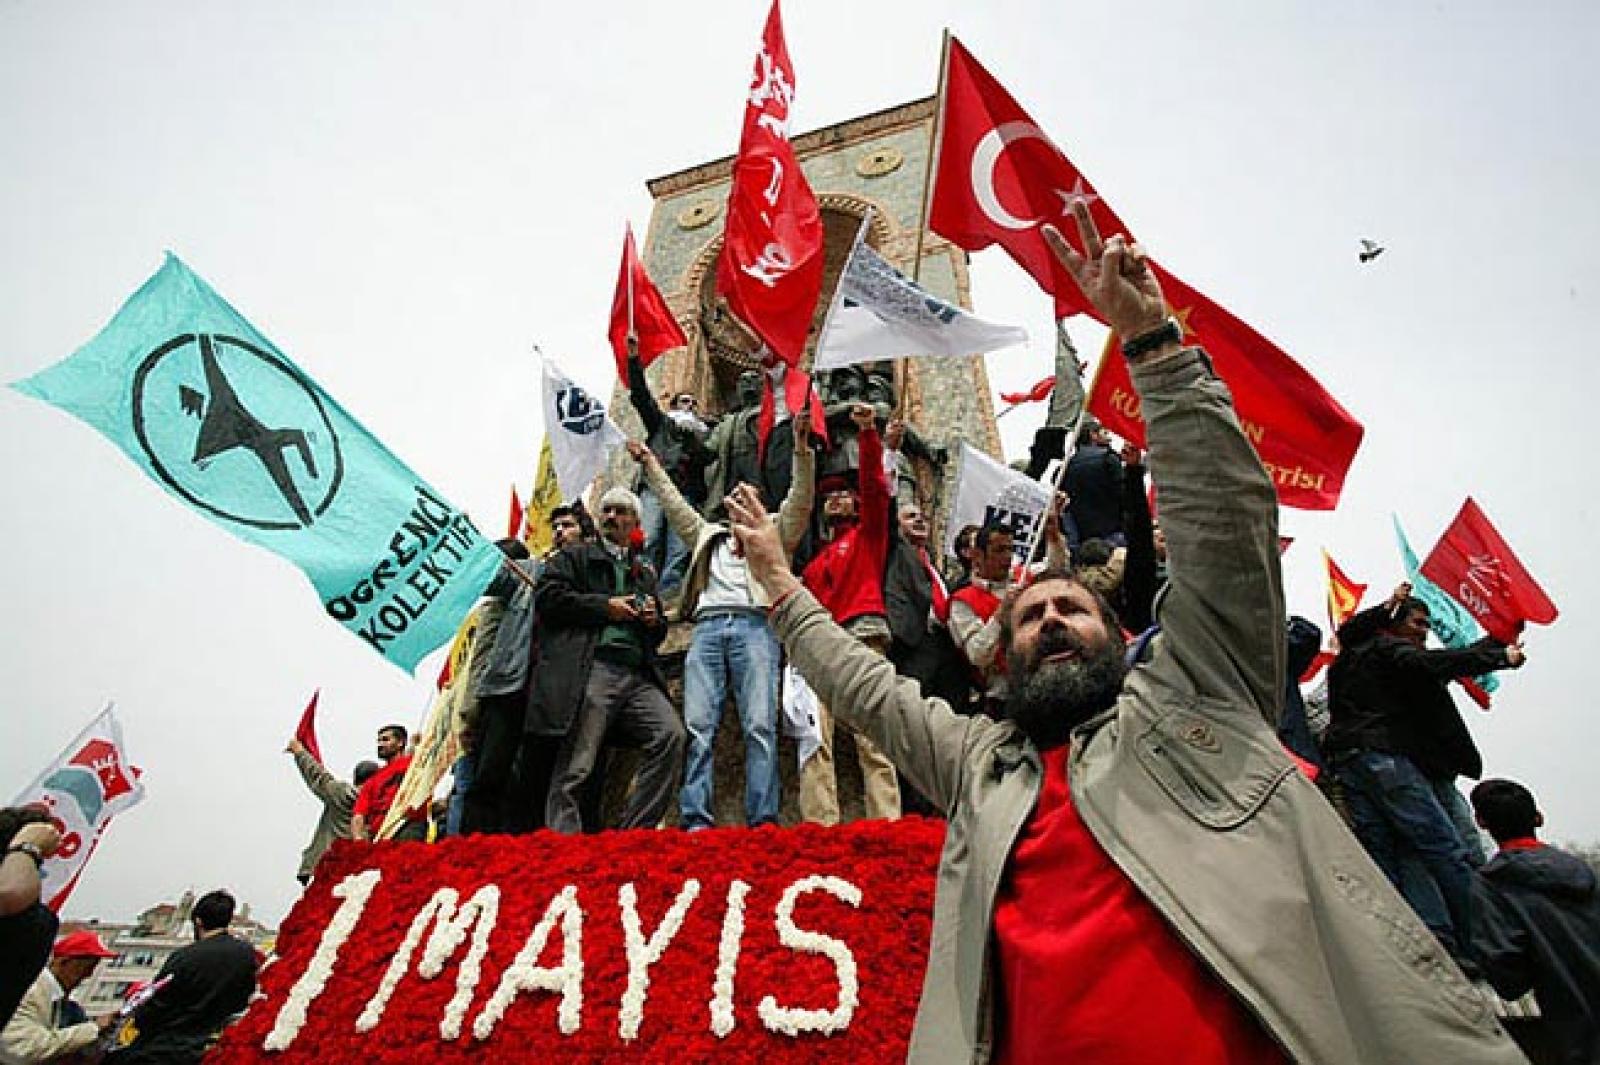 Protesters around the Taksim Republic Monument, Istanbul, May 1, 2009